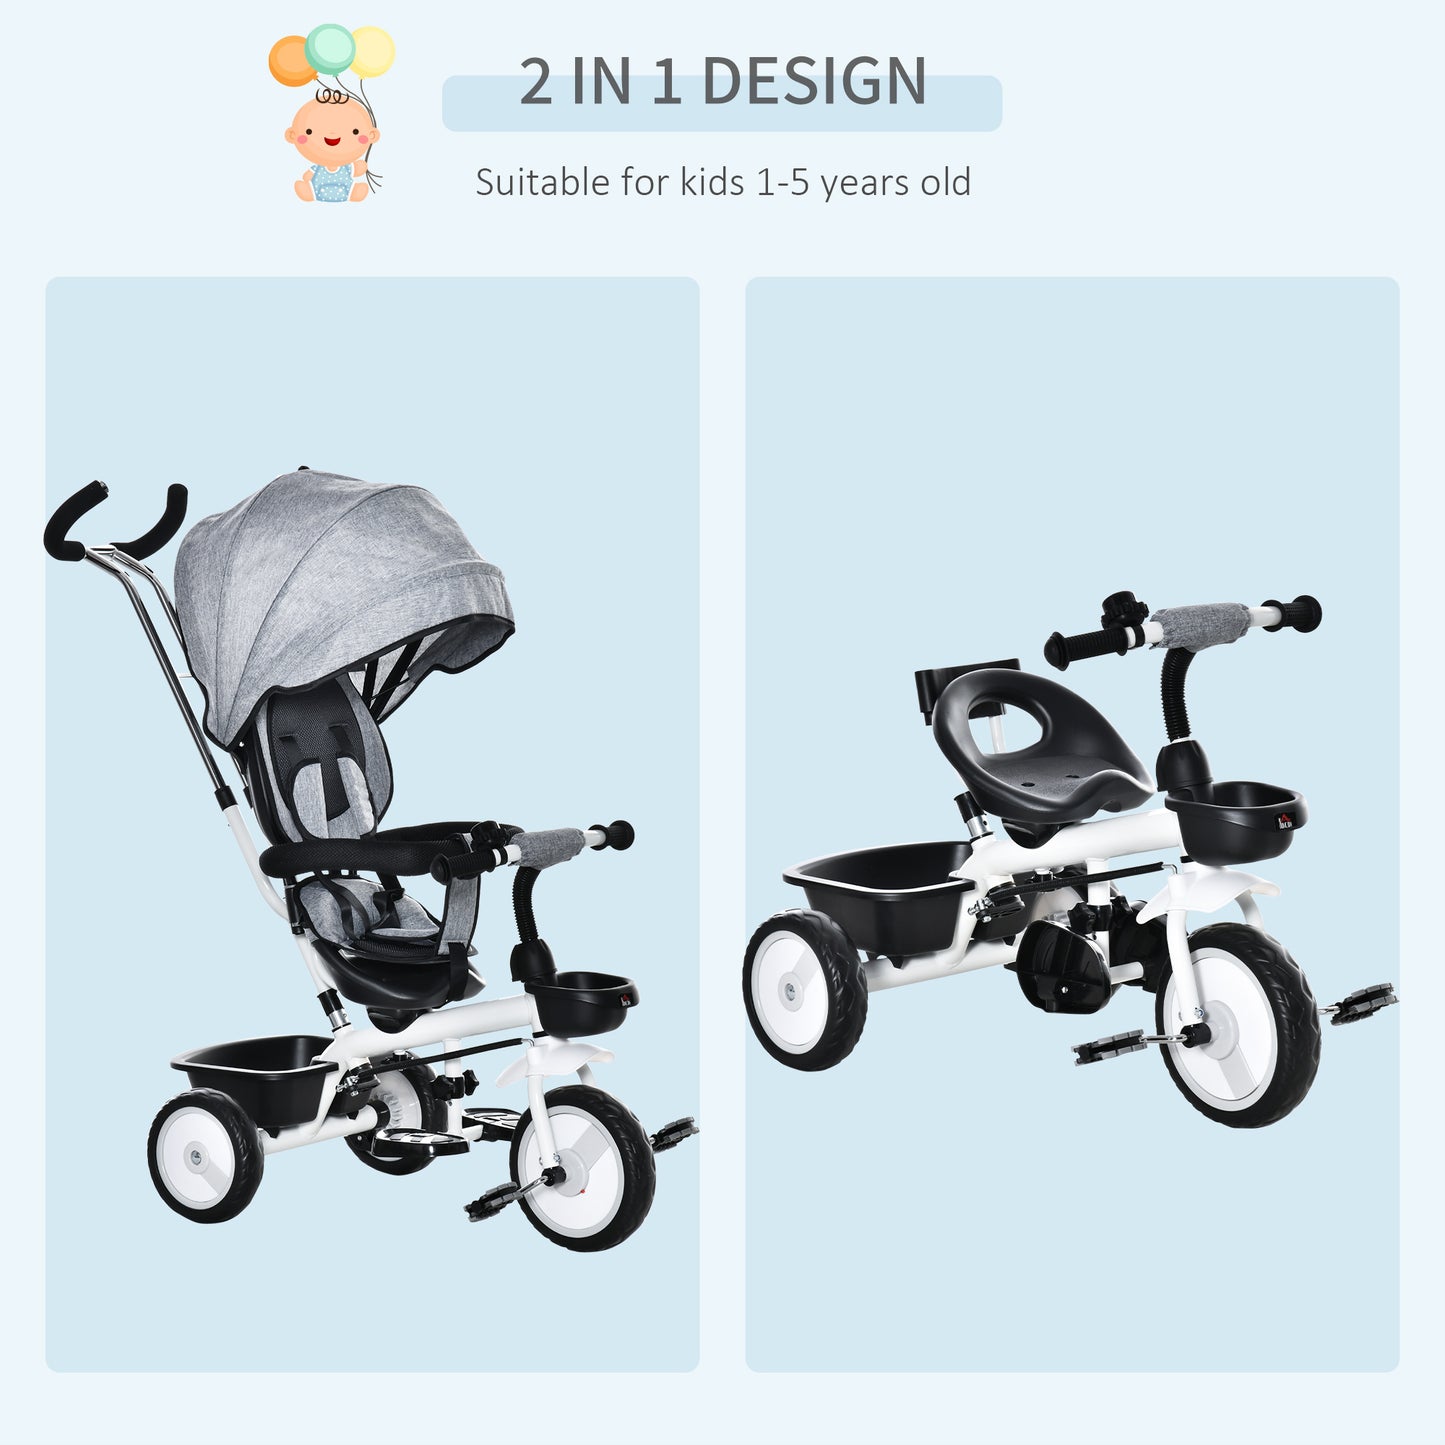 HOMCOM 6 in 1 Baby Tricycle Toddler Stroller Pedal Tricycle w/ Reversible Seat Adjustable Removable Handle Canopy Handrail Belt for 1-5 Years Old Grey